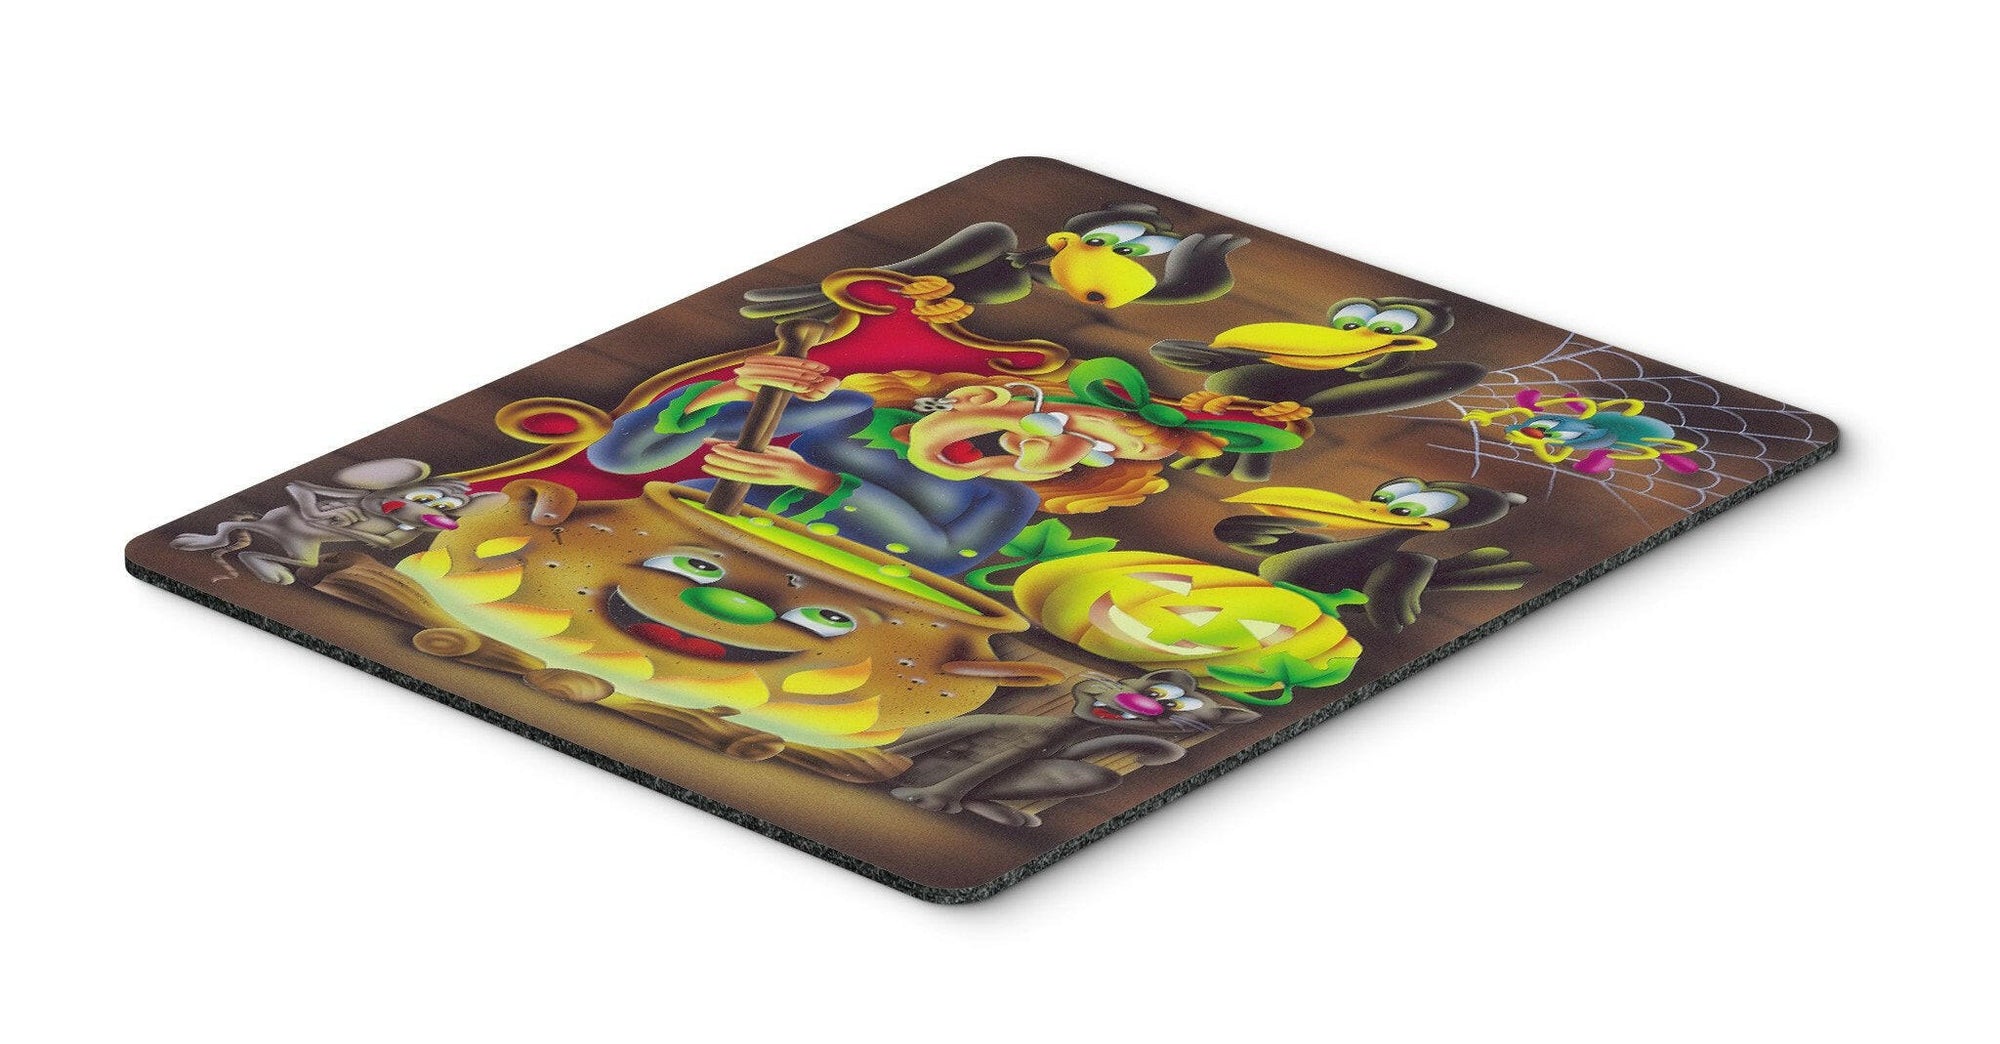 Witch and Crows Stirring it up Halloween Mouse Pad, Hot Pad or Trivet APH0934MP by Caroline's Treasures